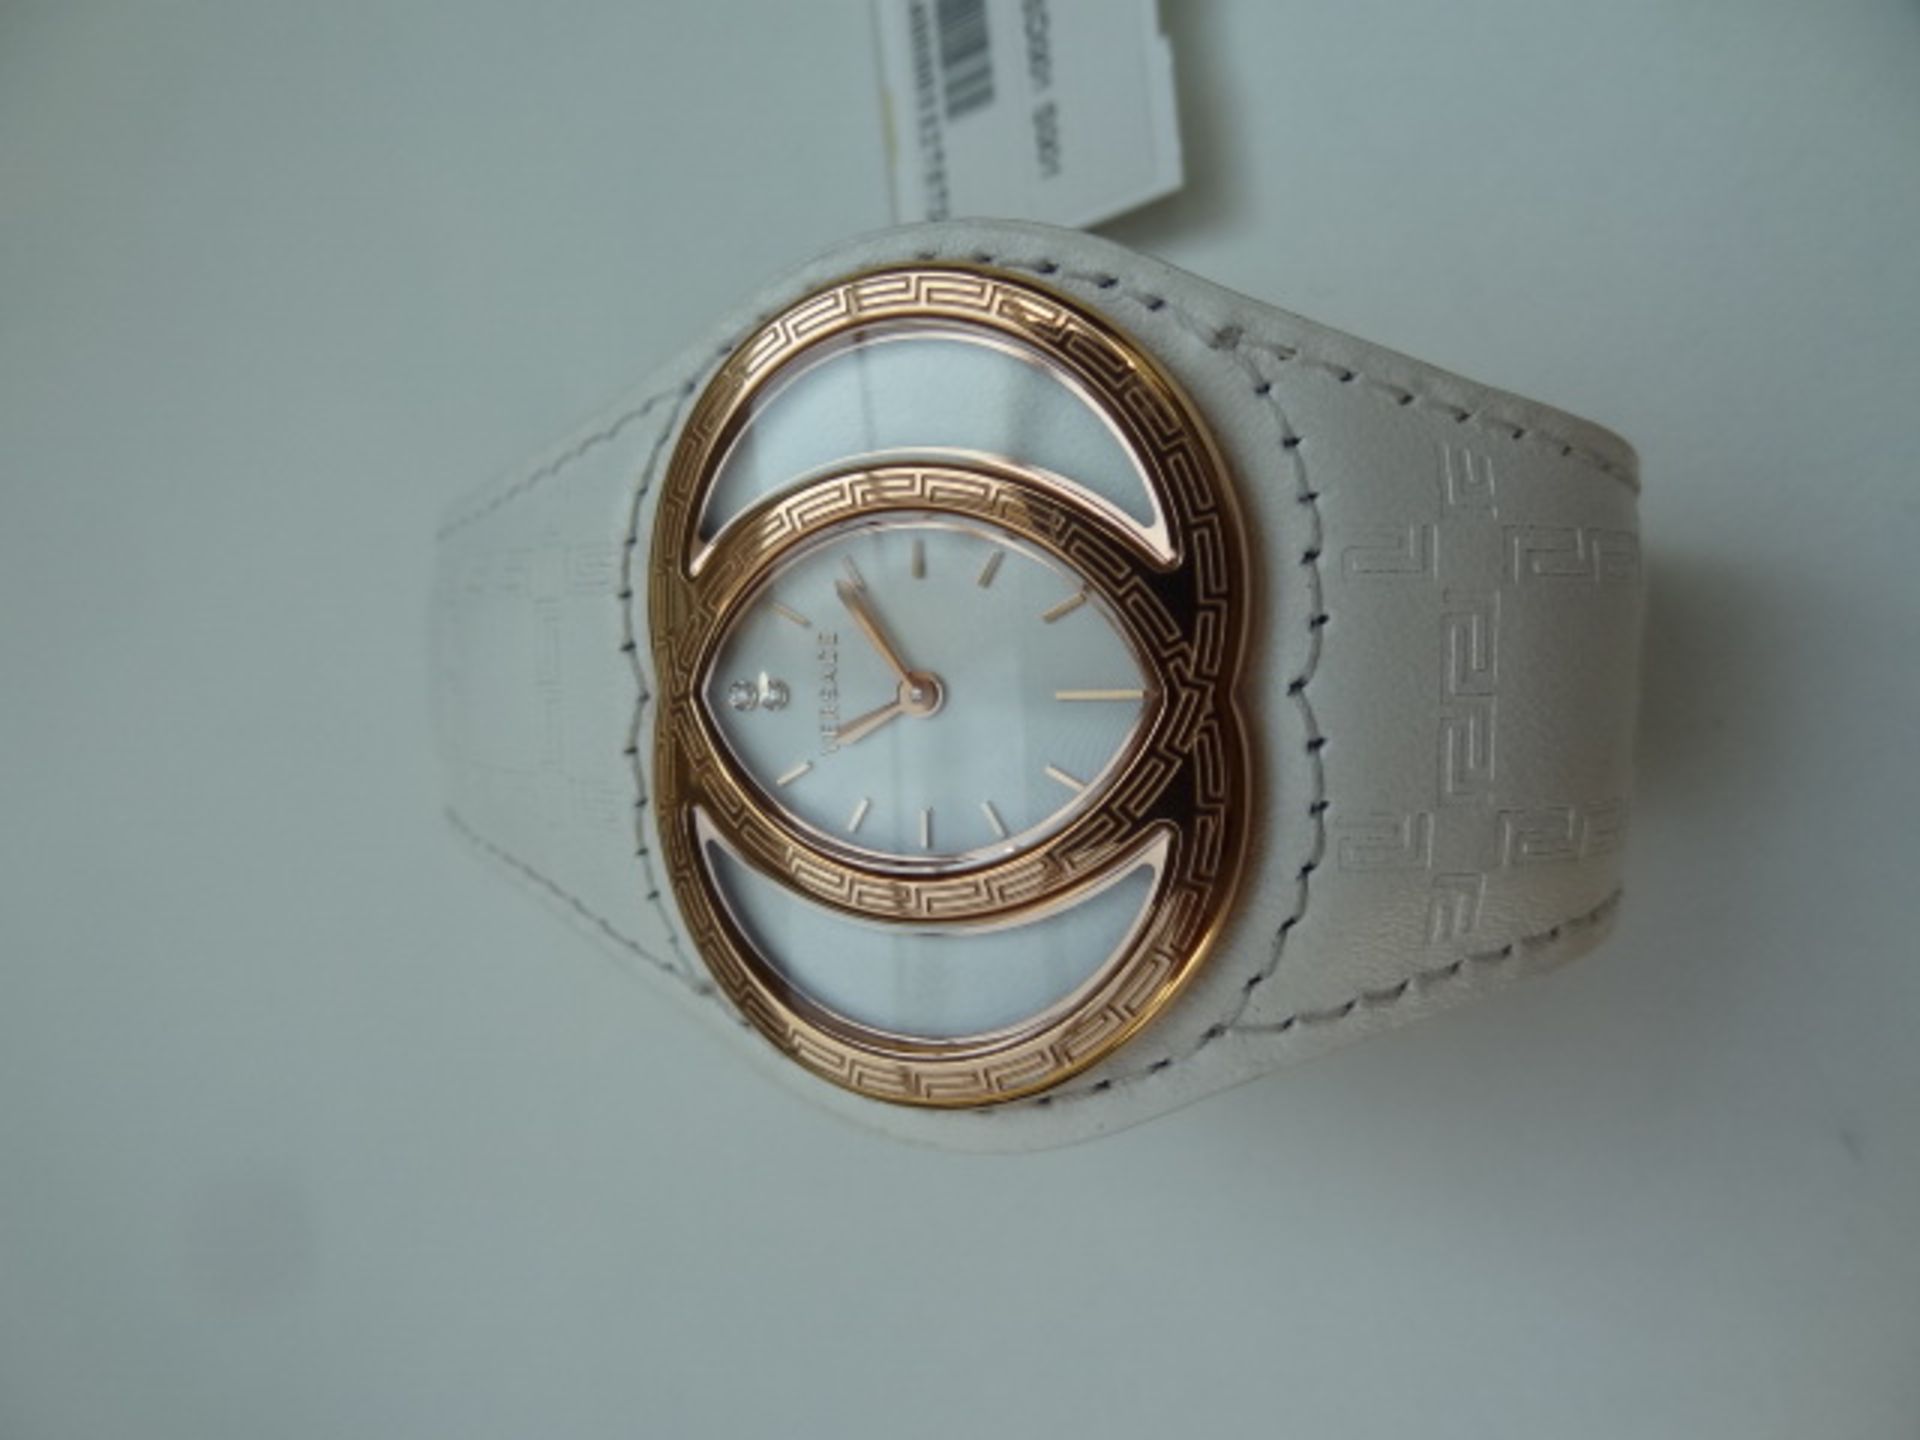 Gianni Versace Eclissi 84Q White Dial Rose Gold Ladies Watch - Image 5 of 13